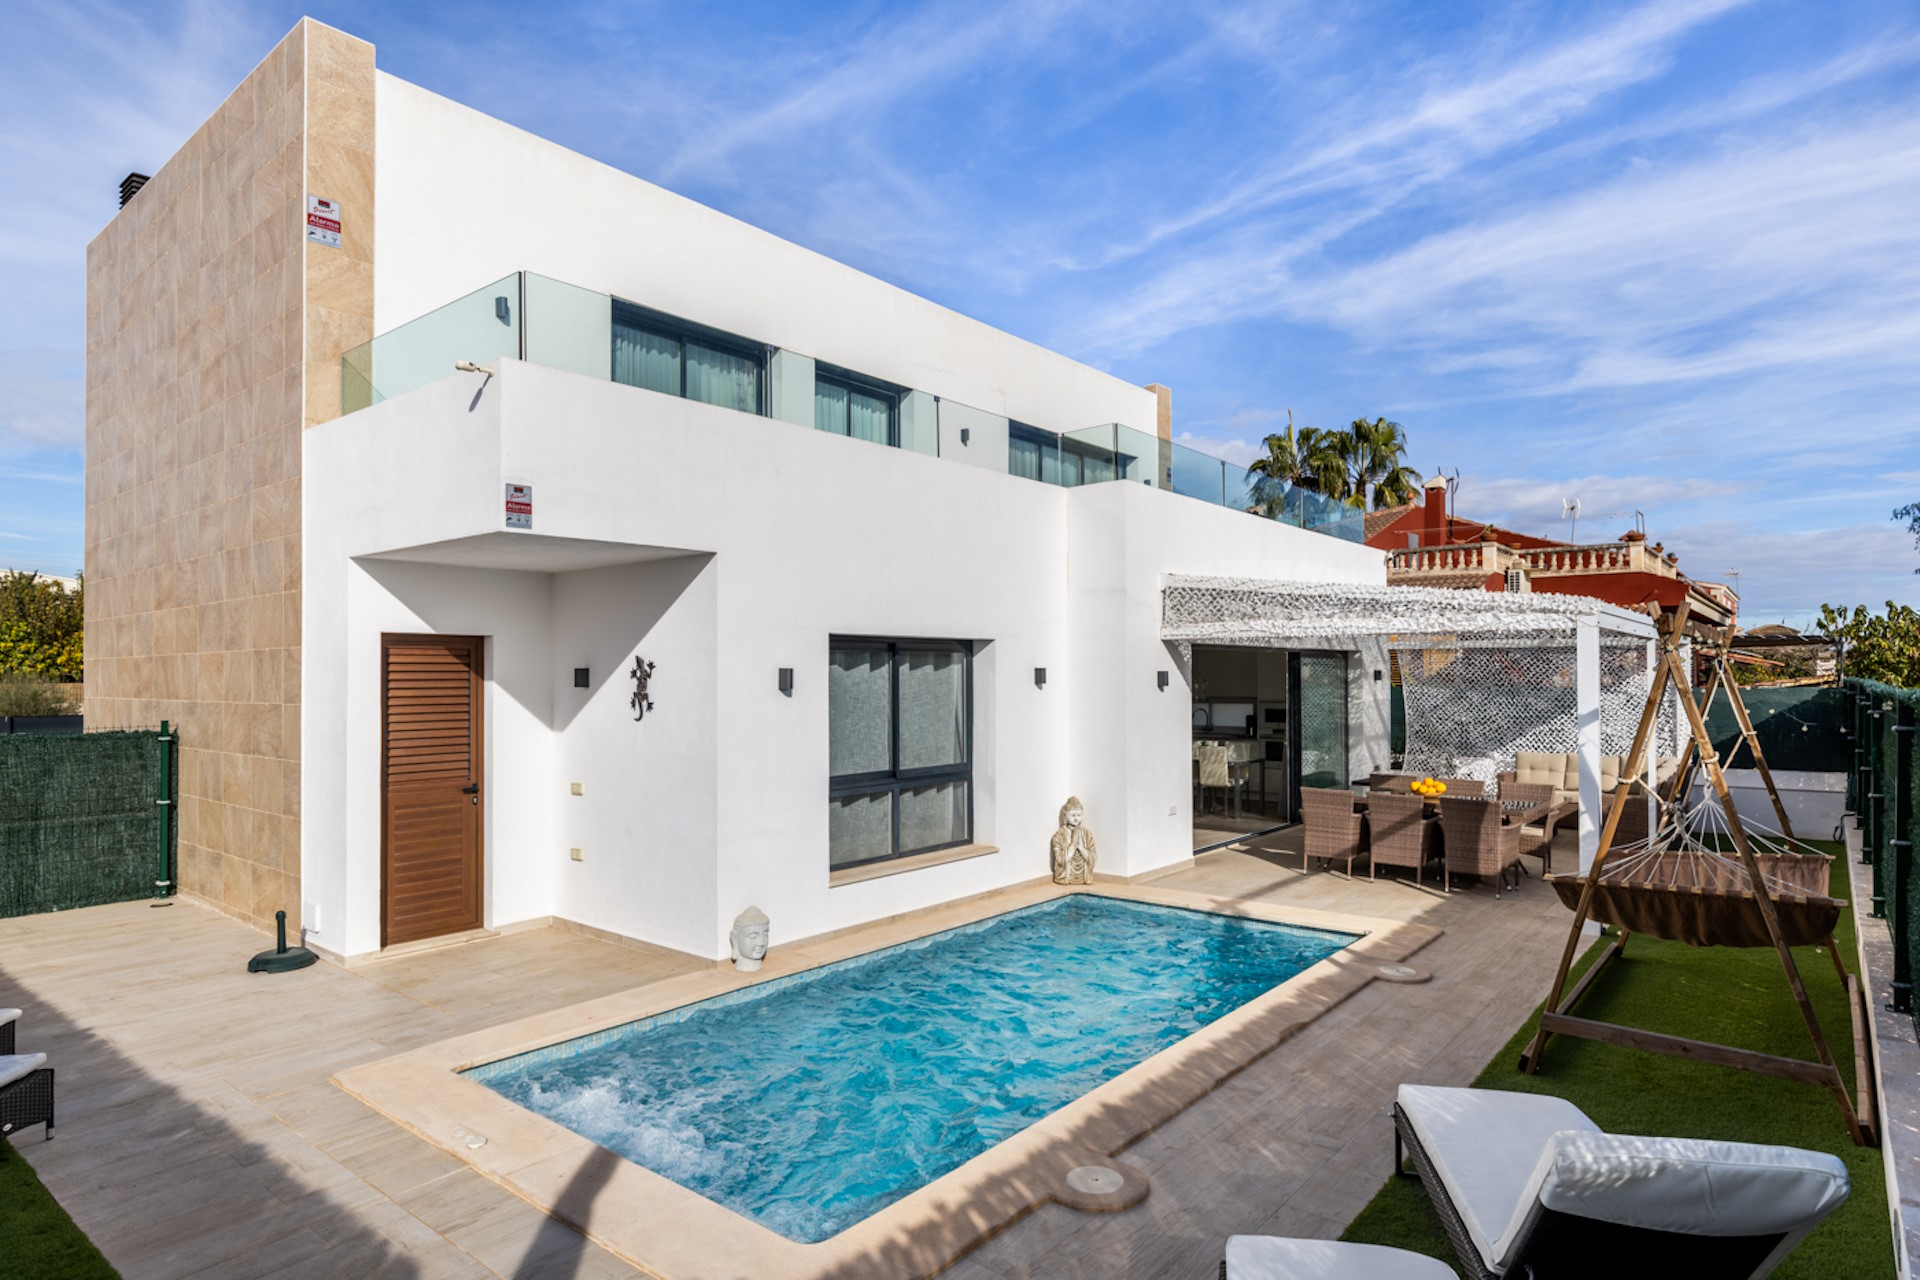 Modern family villa with pool and 4 bedrooms in Marratxi Son Marcia for sale